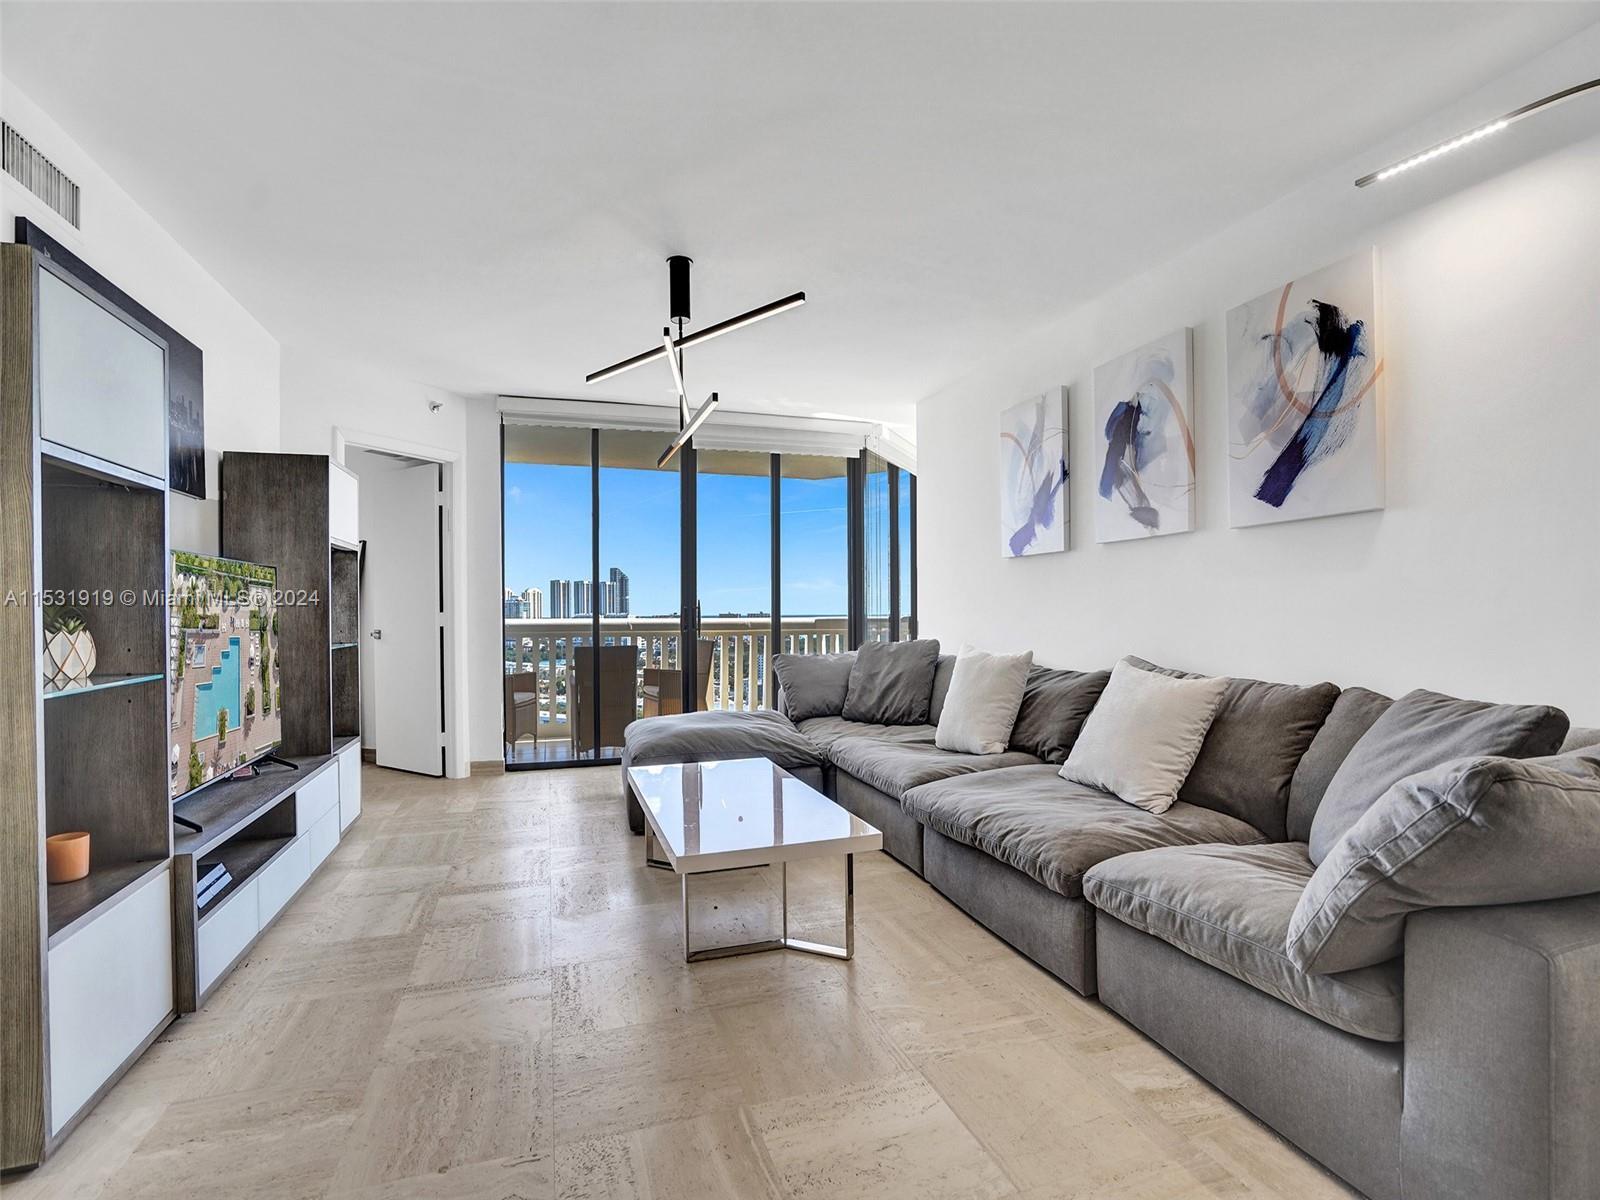 REMODELED 25TH FLOOR 3 BEDROOM 3 BATHROOM RESIDENCE WITH 1840 SQ.FT. IT HAS BEAUTIFUL VIEWS OF THE O